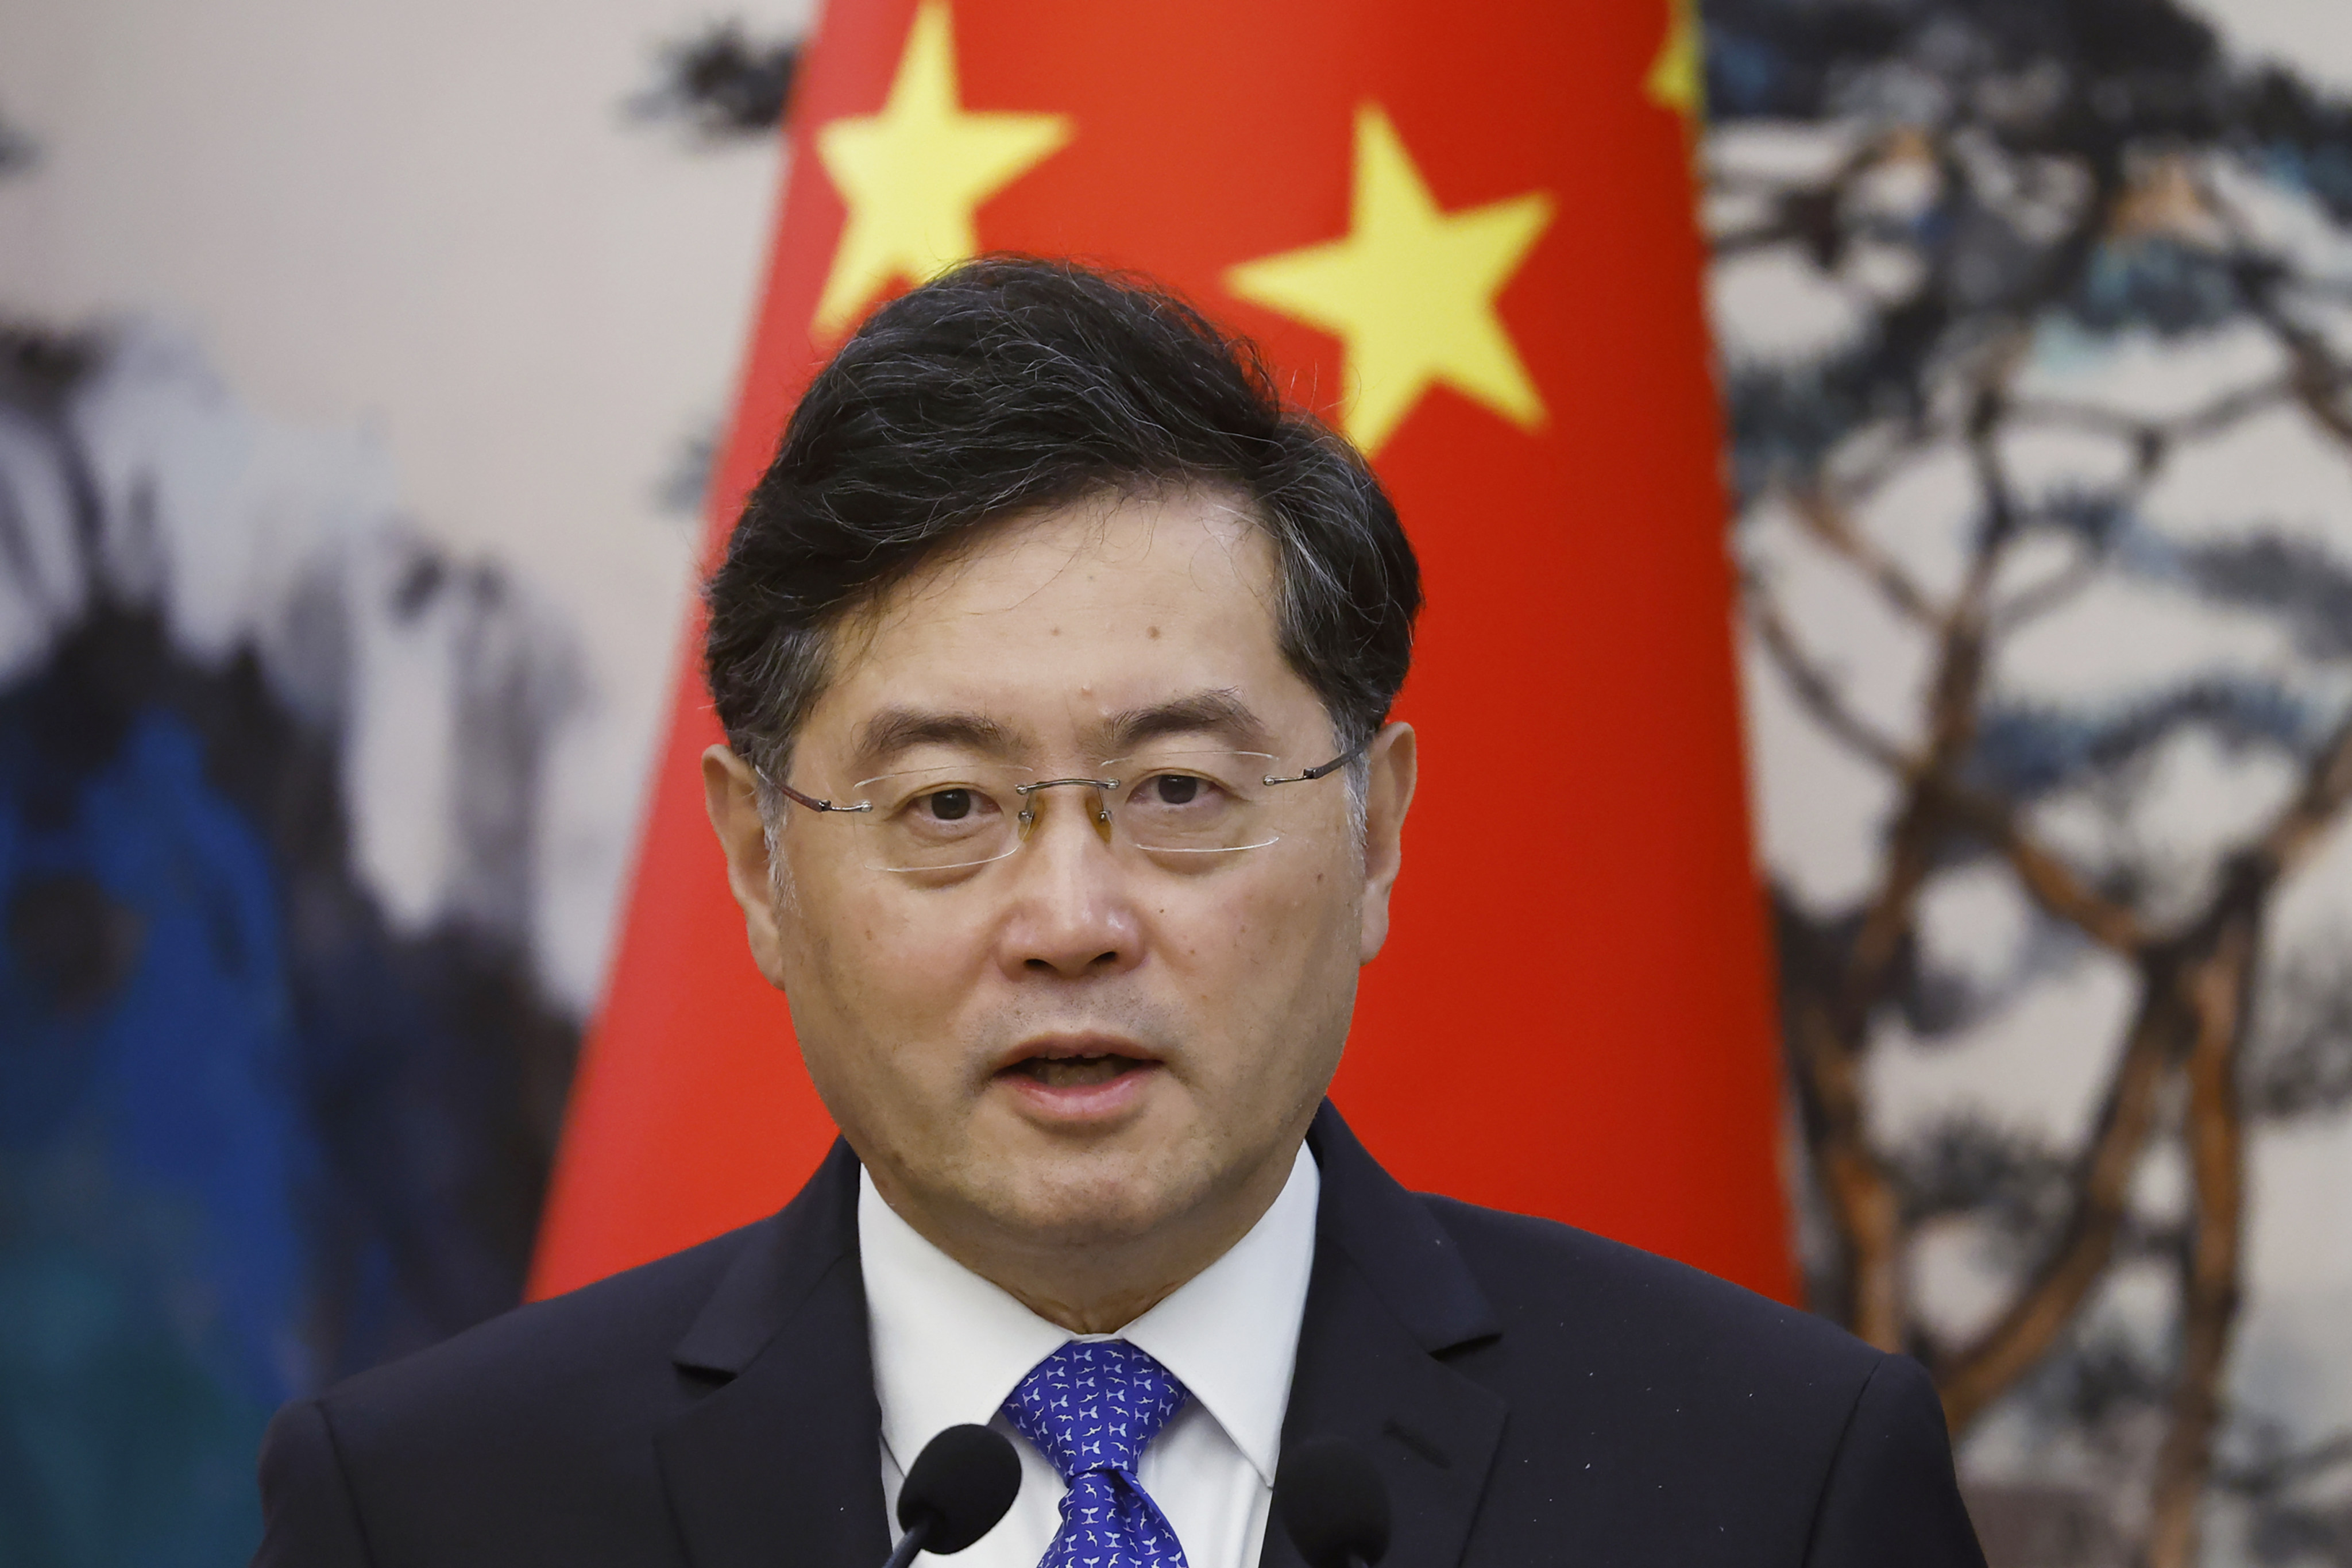 Chinese Foreign Minister Qin Gang is seen at a joint news conference with his Dutch counterpart Wopke Hoekstra in Beijing on May 23. Qin has not been seen in public since June 25. Photo: AP 